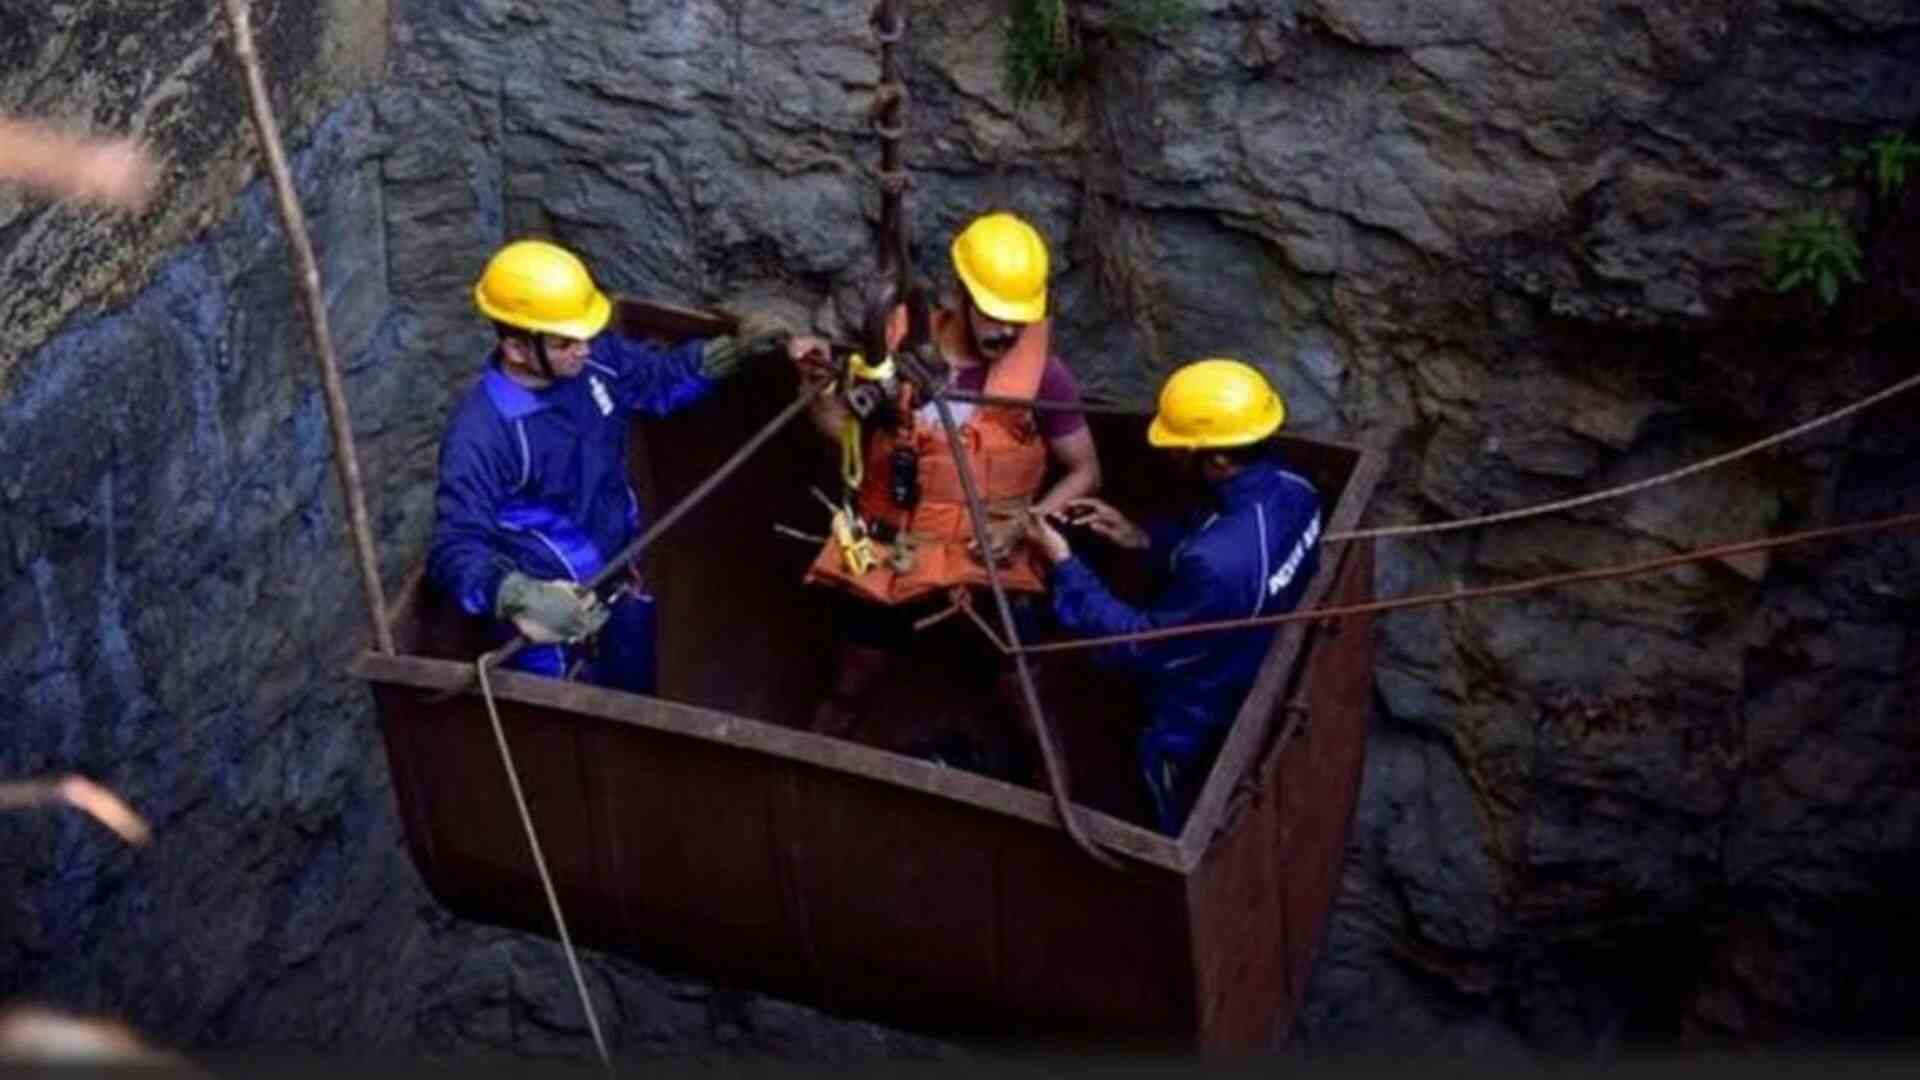 Odisha: 4 Labourers Killed In Separate Cave-In Accidents